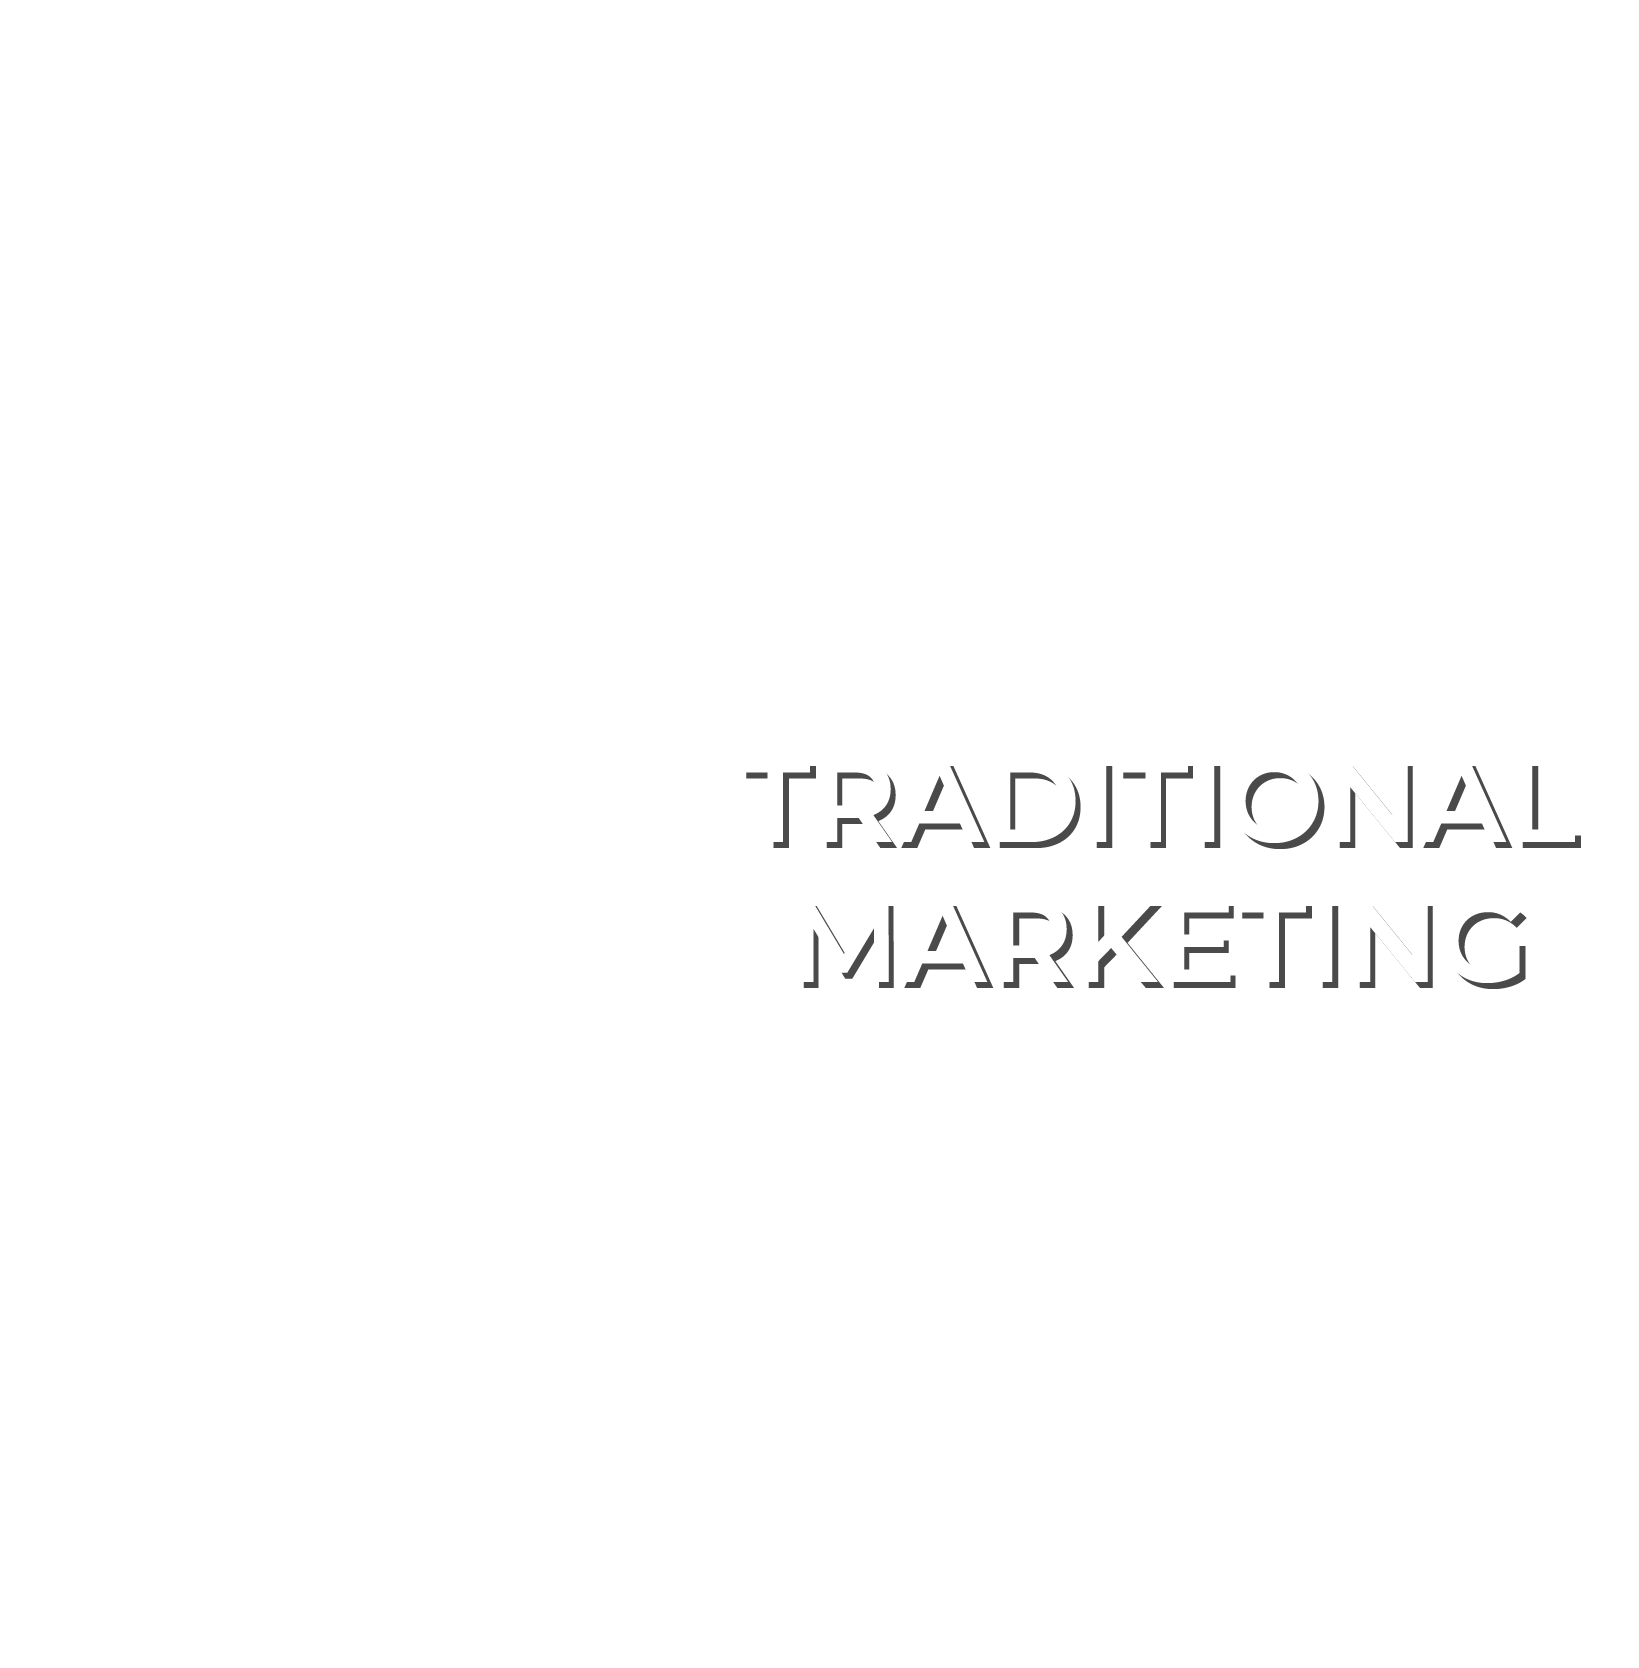 Traditional marketing graphic